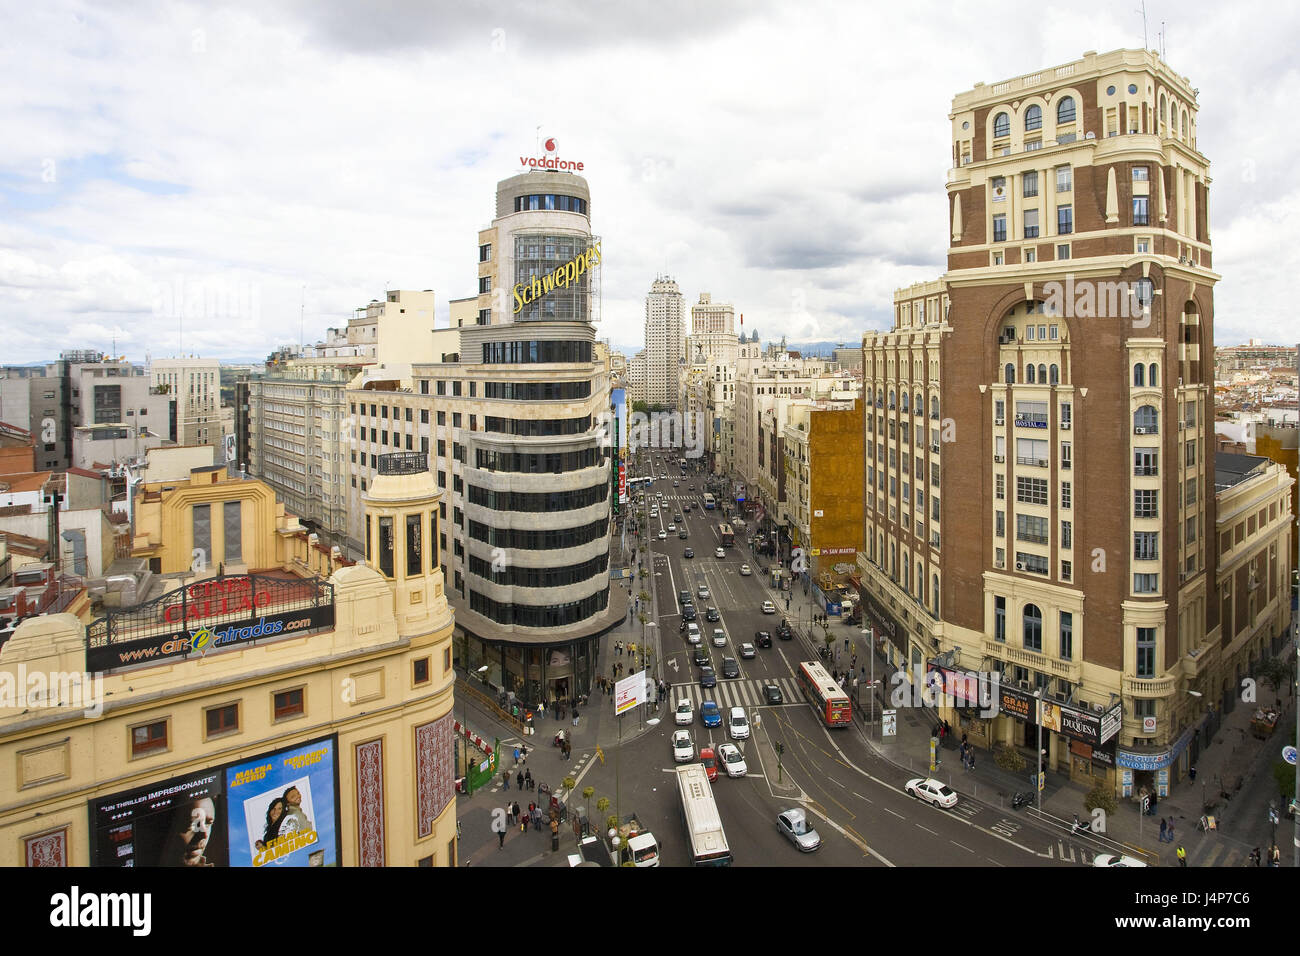 Spain, Madrid, plaza de Callao, grain Via, street scene, building, from above, town, street, high street, shopping street, houses, high rises, advertising signs, street, cars, vehicles, buses, tourism, sky, cloudies, Stock Photo